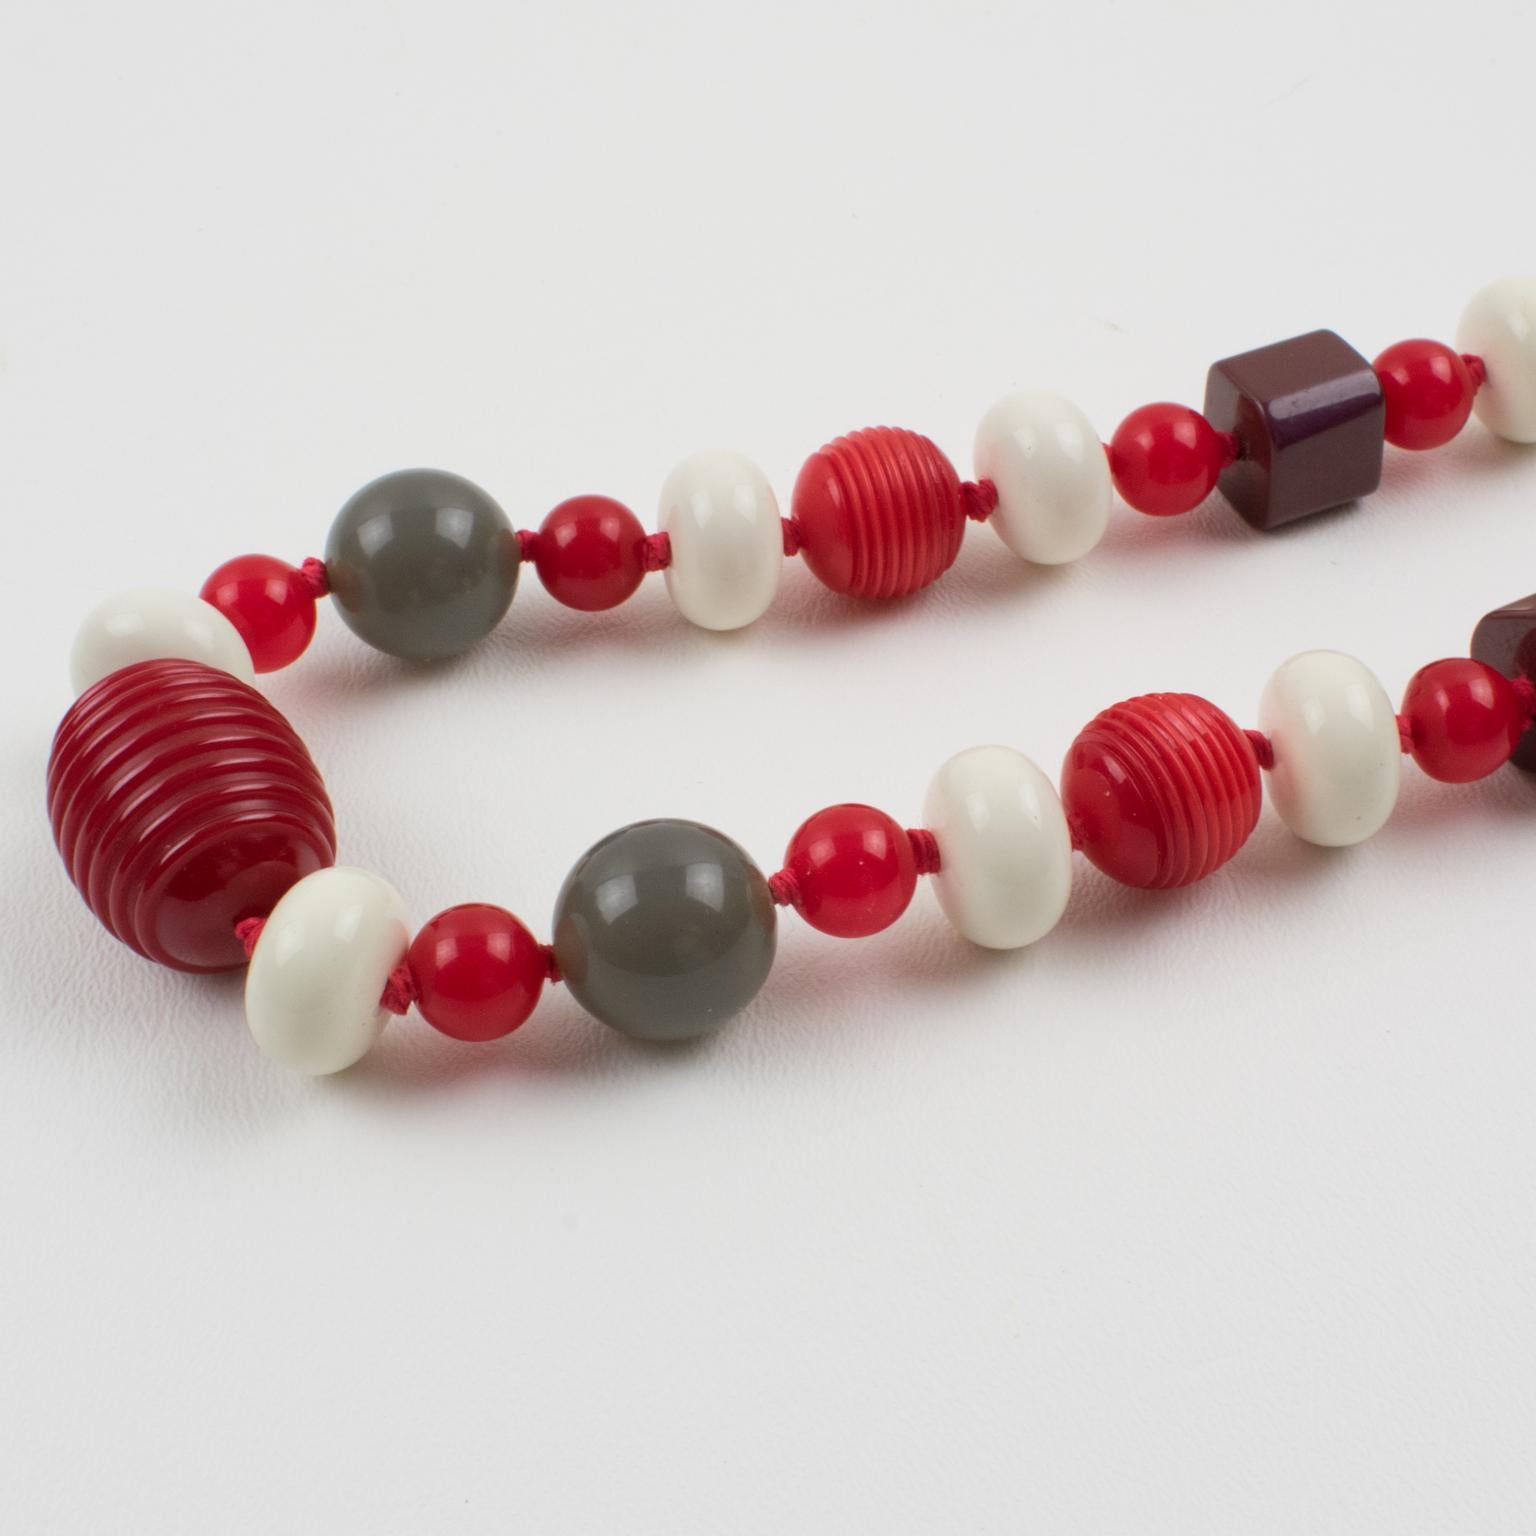 Bakelite and Lucite Long Necklace Gray, White, and Red Colors For Sale 5